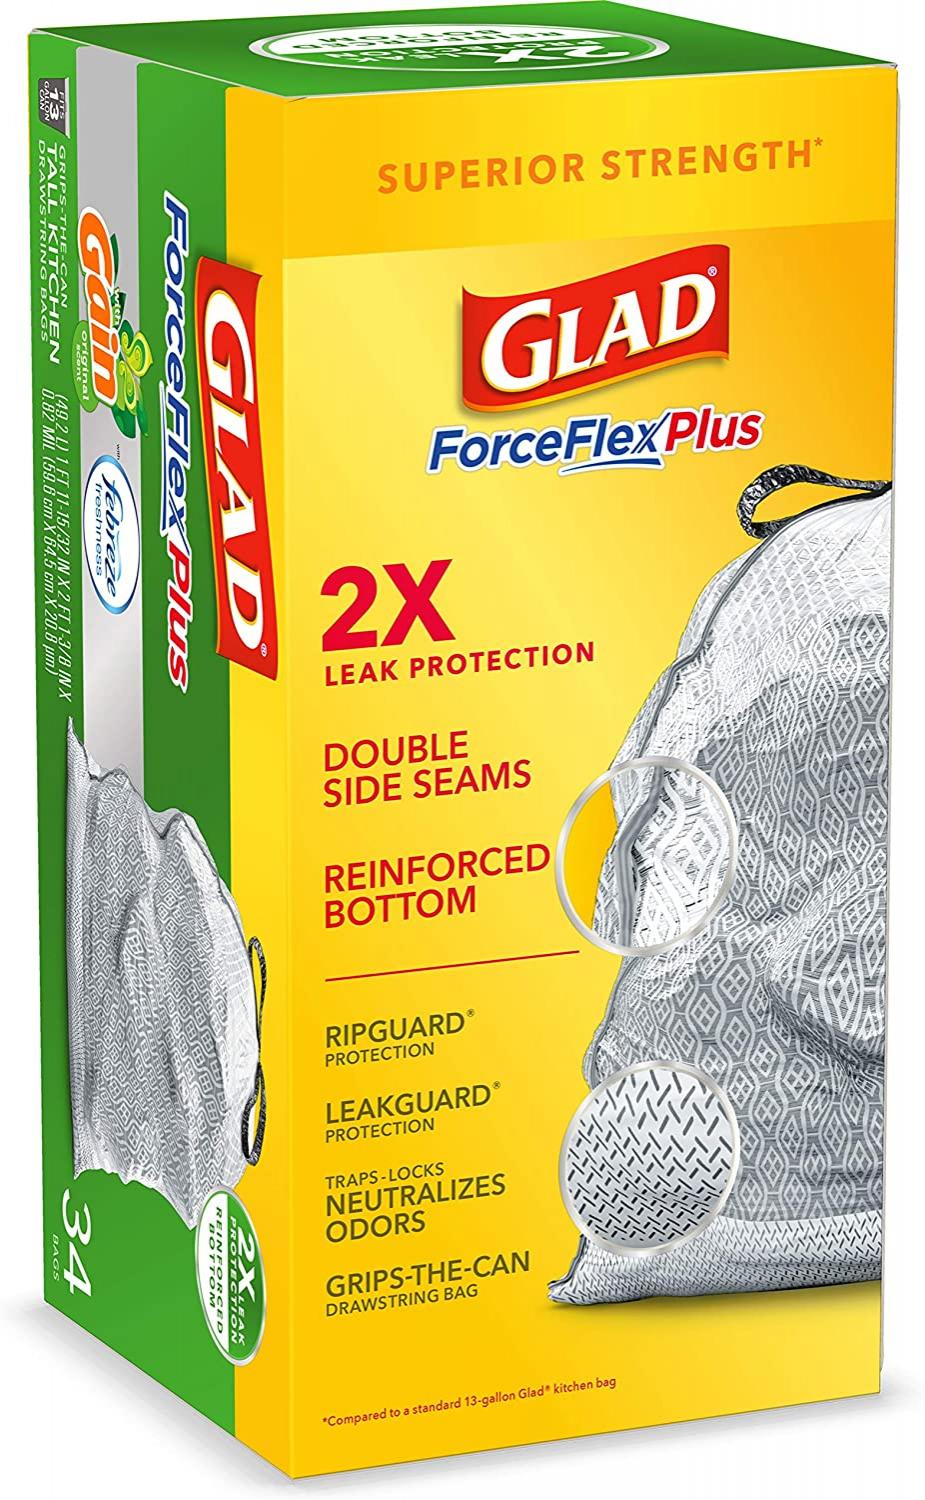 Glad ForceFlexPlus Tall Kitchen Drawstring Trash Bags, 13 Gallon Grey Trash Bag, Gain Original with Febreze Freshness 34 Count (Package May Vary)